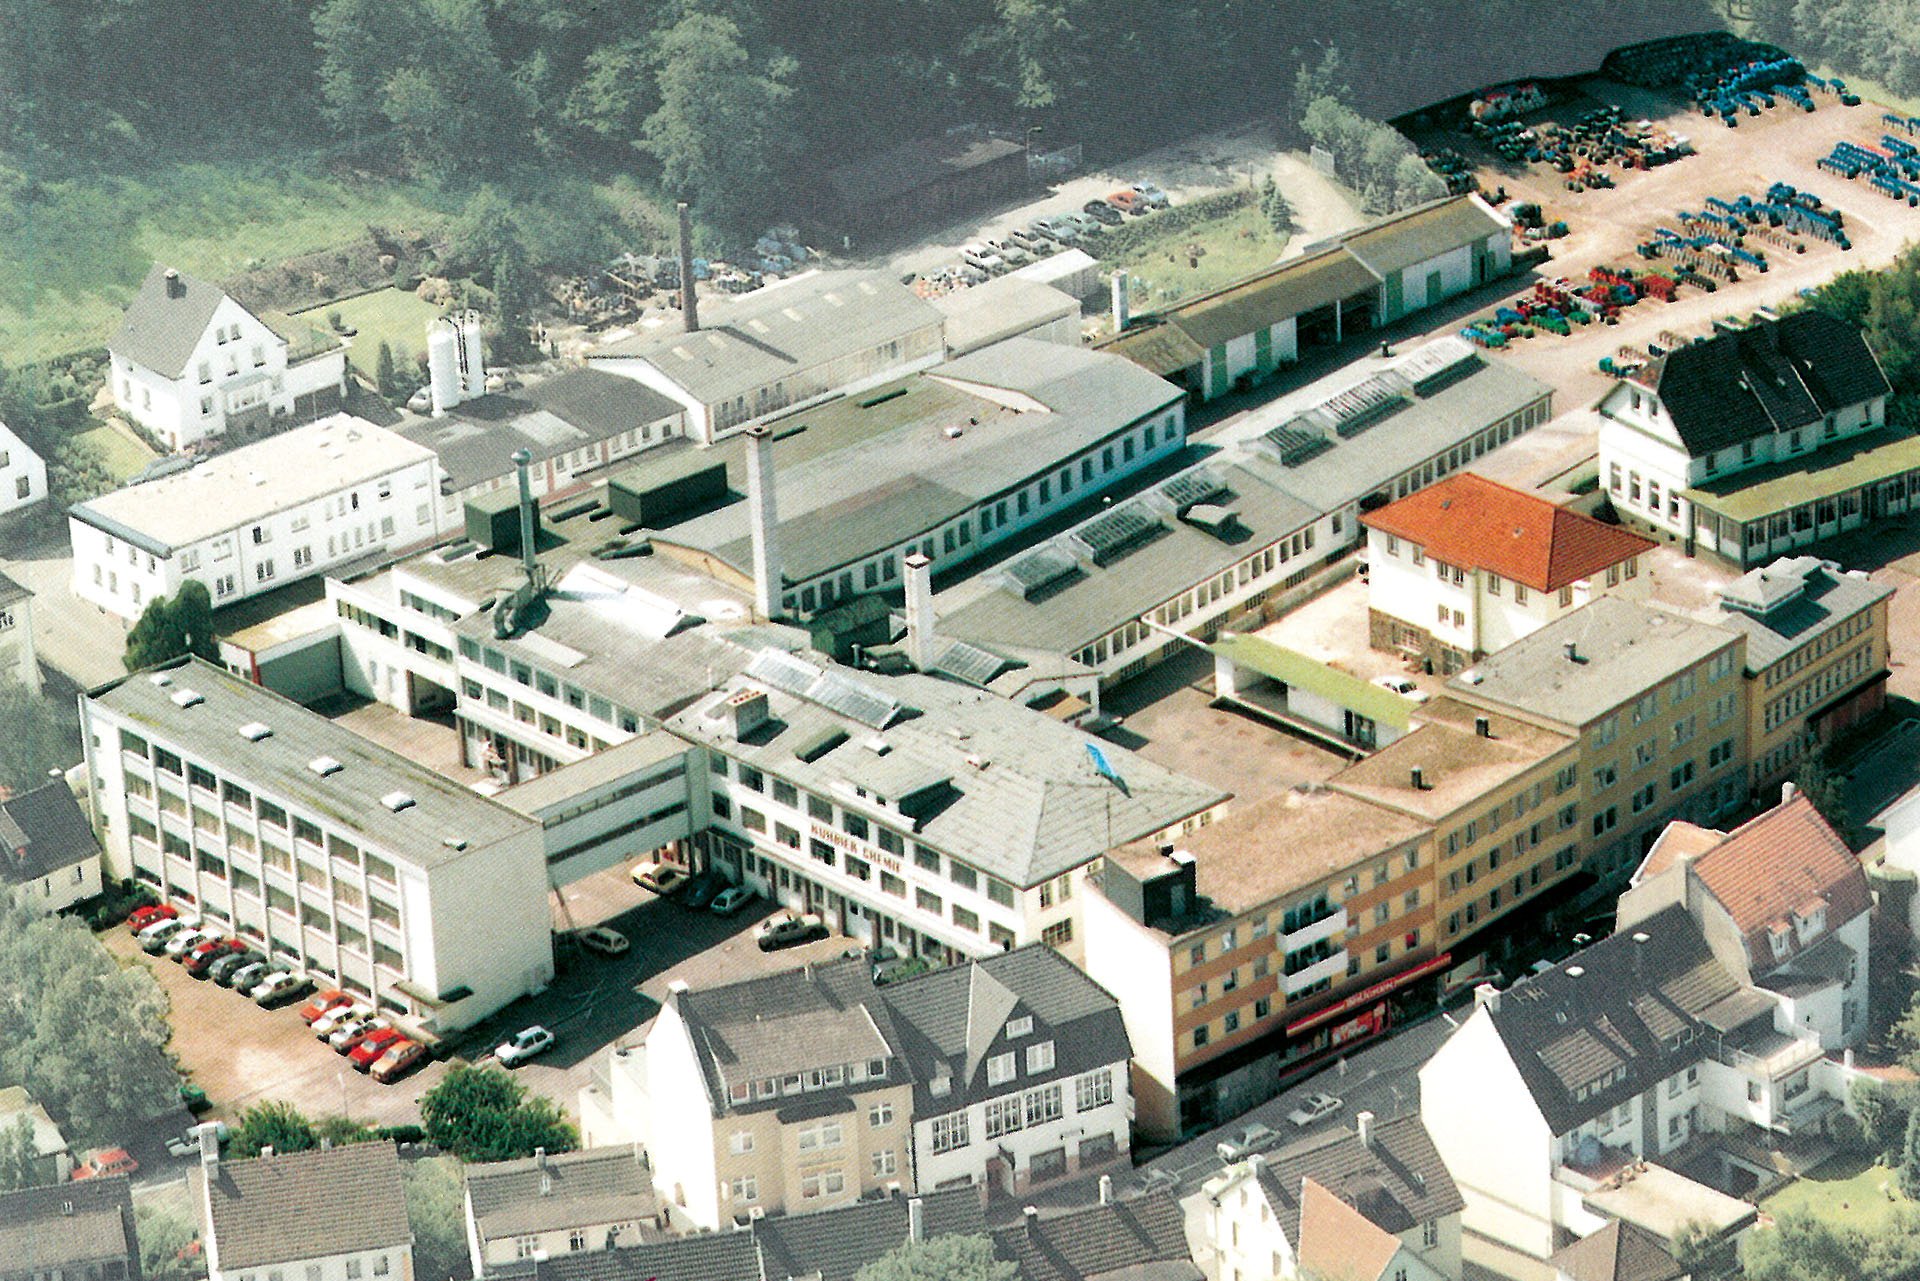 Kierspe factory from above